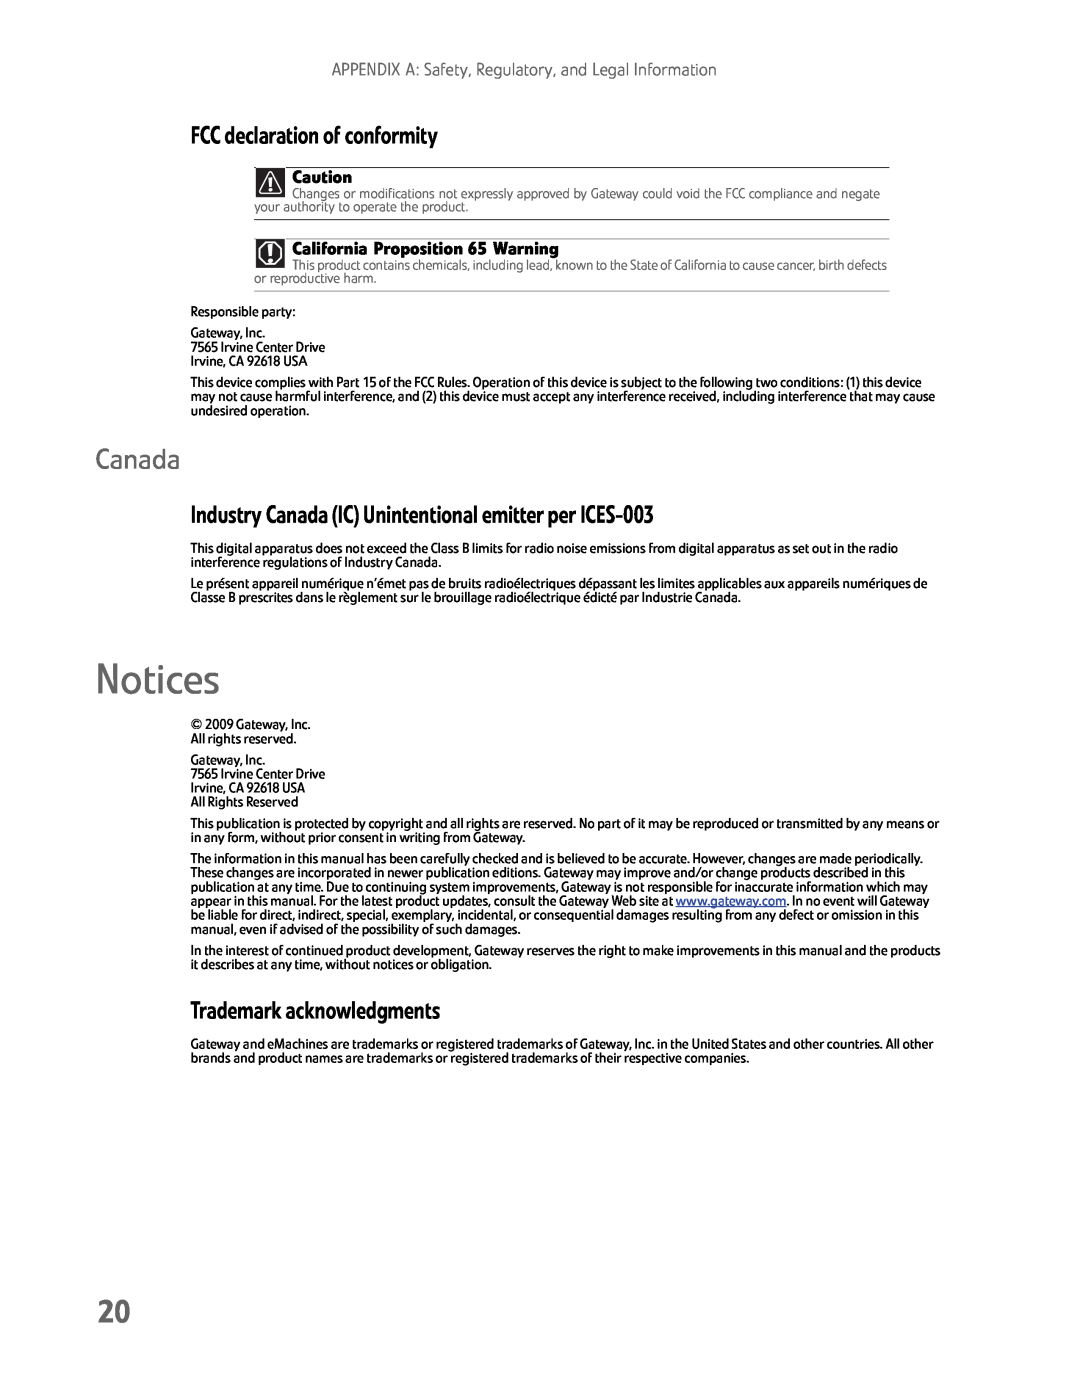 Gateway HX2000 manual Notices, FCC declaration of conformity, Industry Canada IC Unintentional emitter per ICES-003 